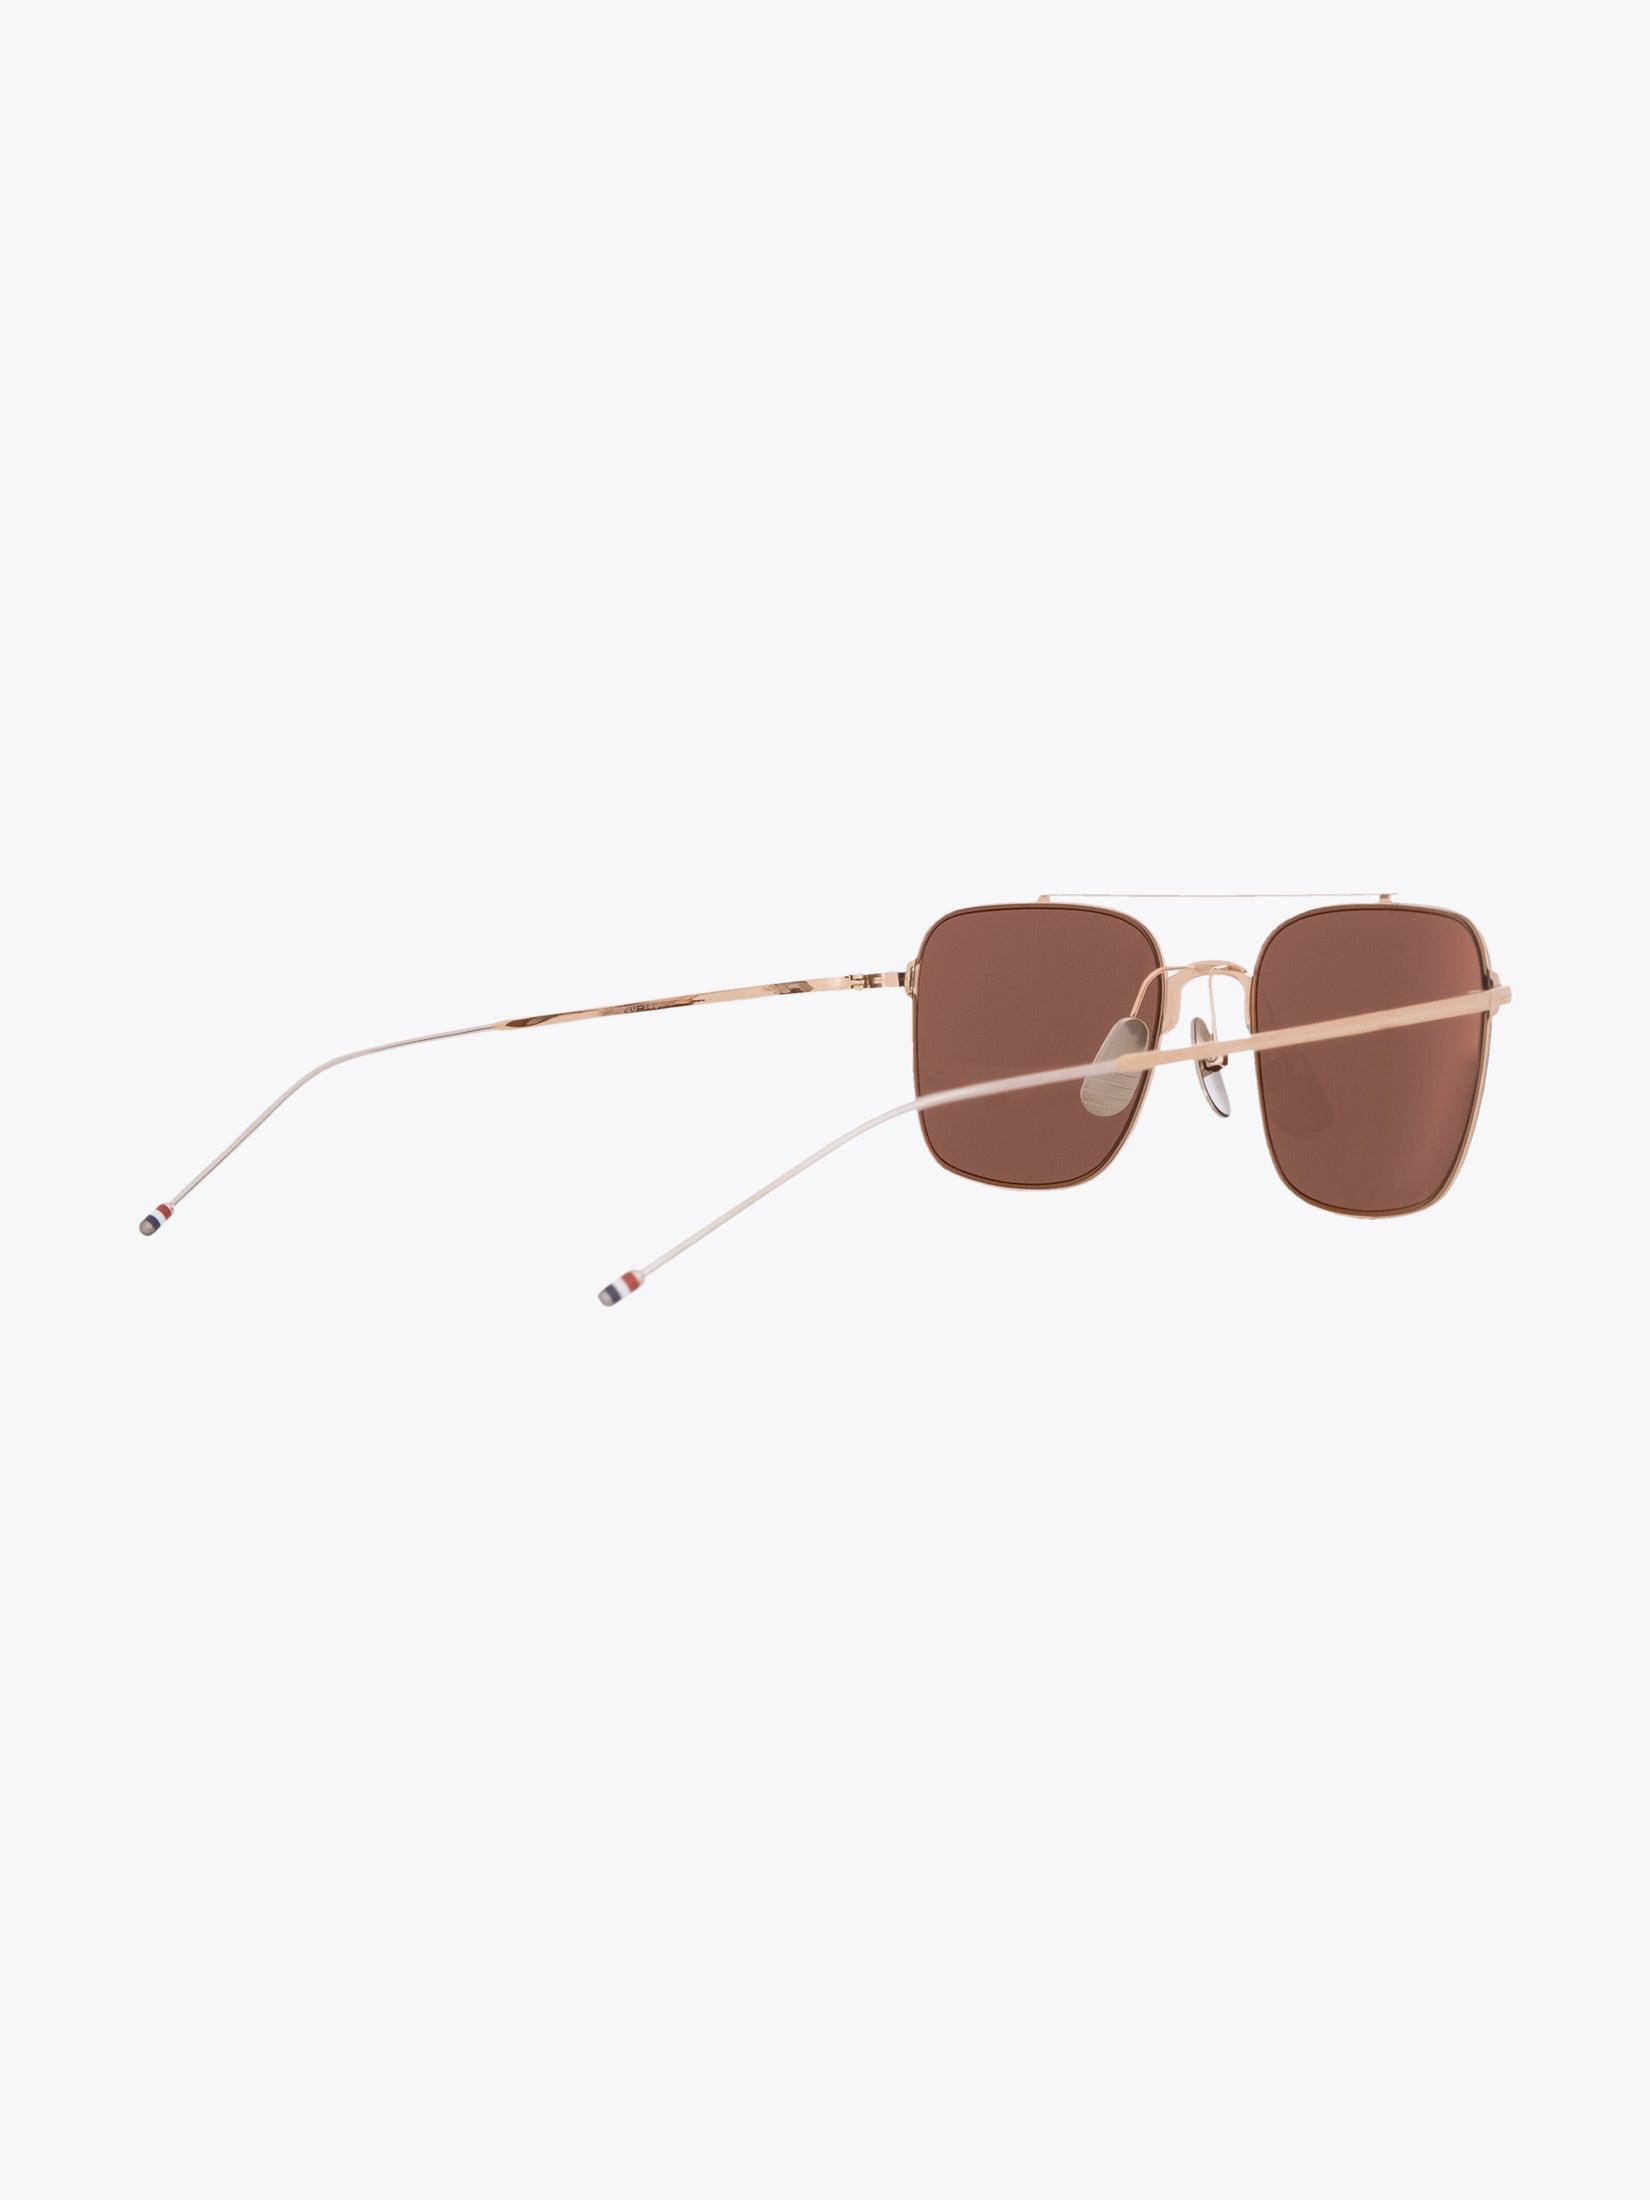 Thom Browne TB-120 Sonnenbrille Gold/Silber